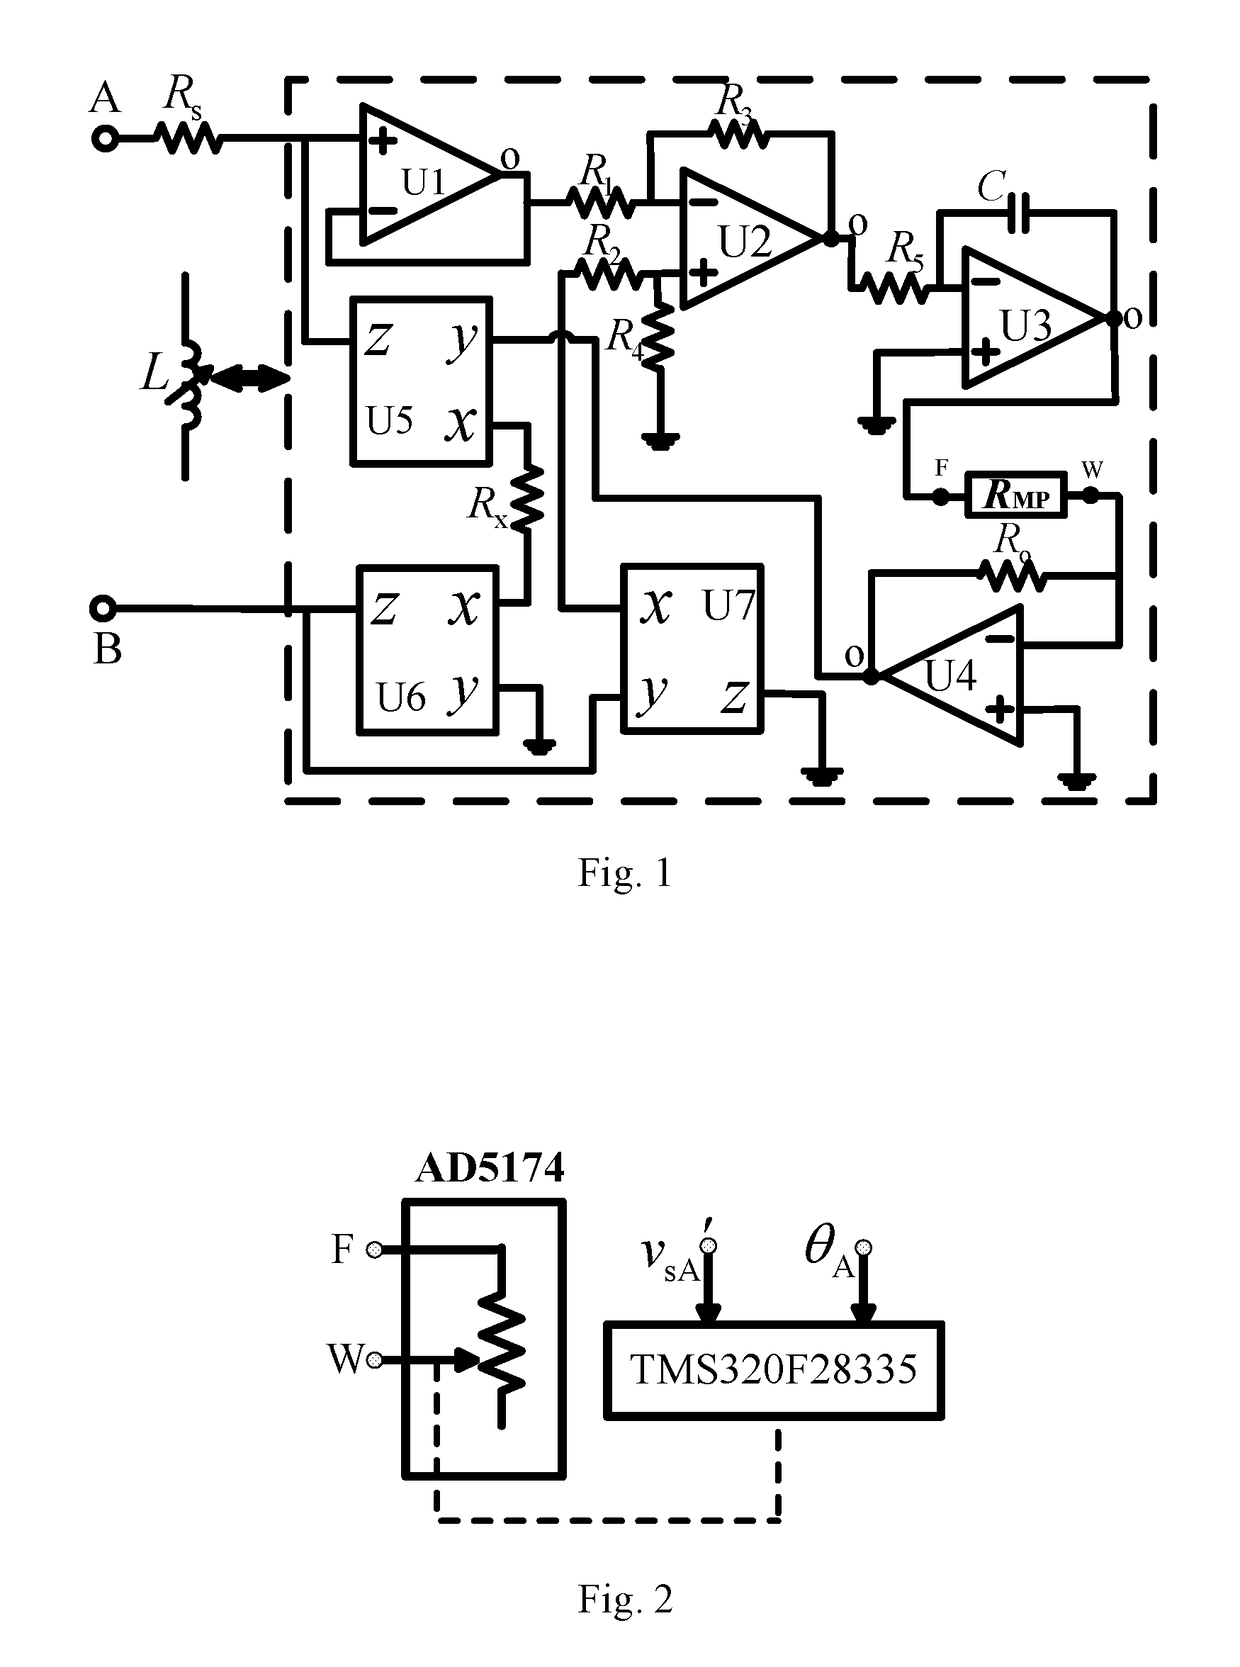 Switched reluctance motor modeling method